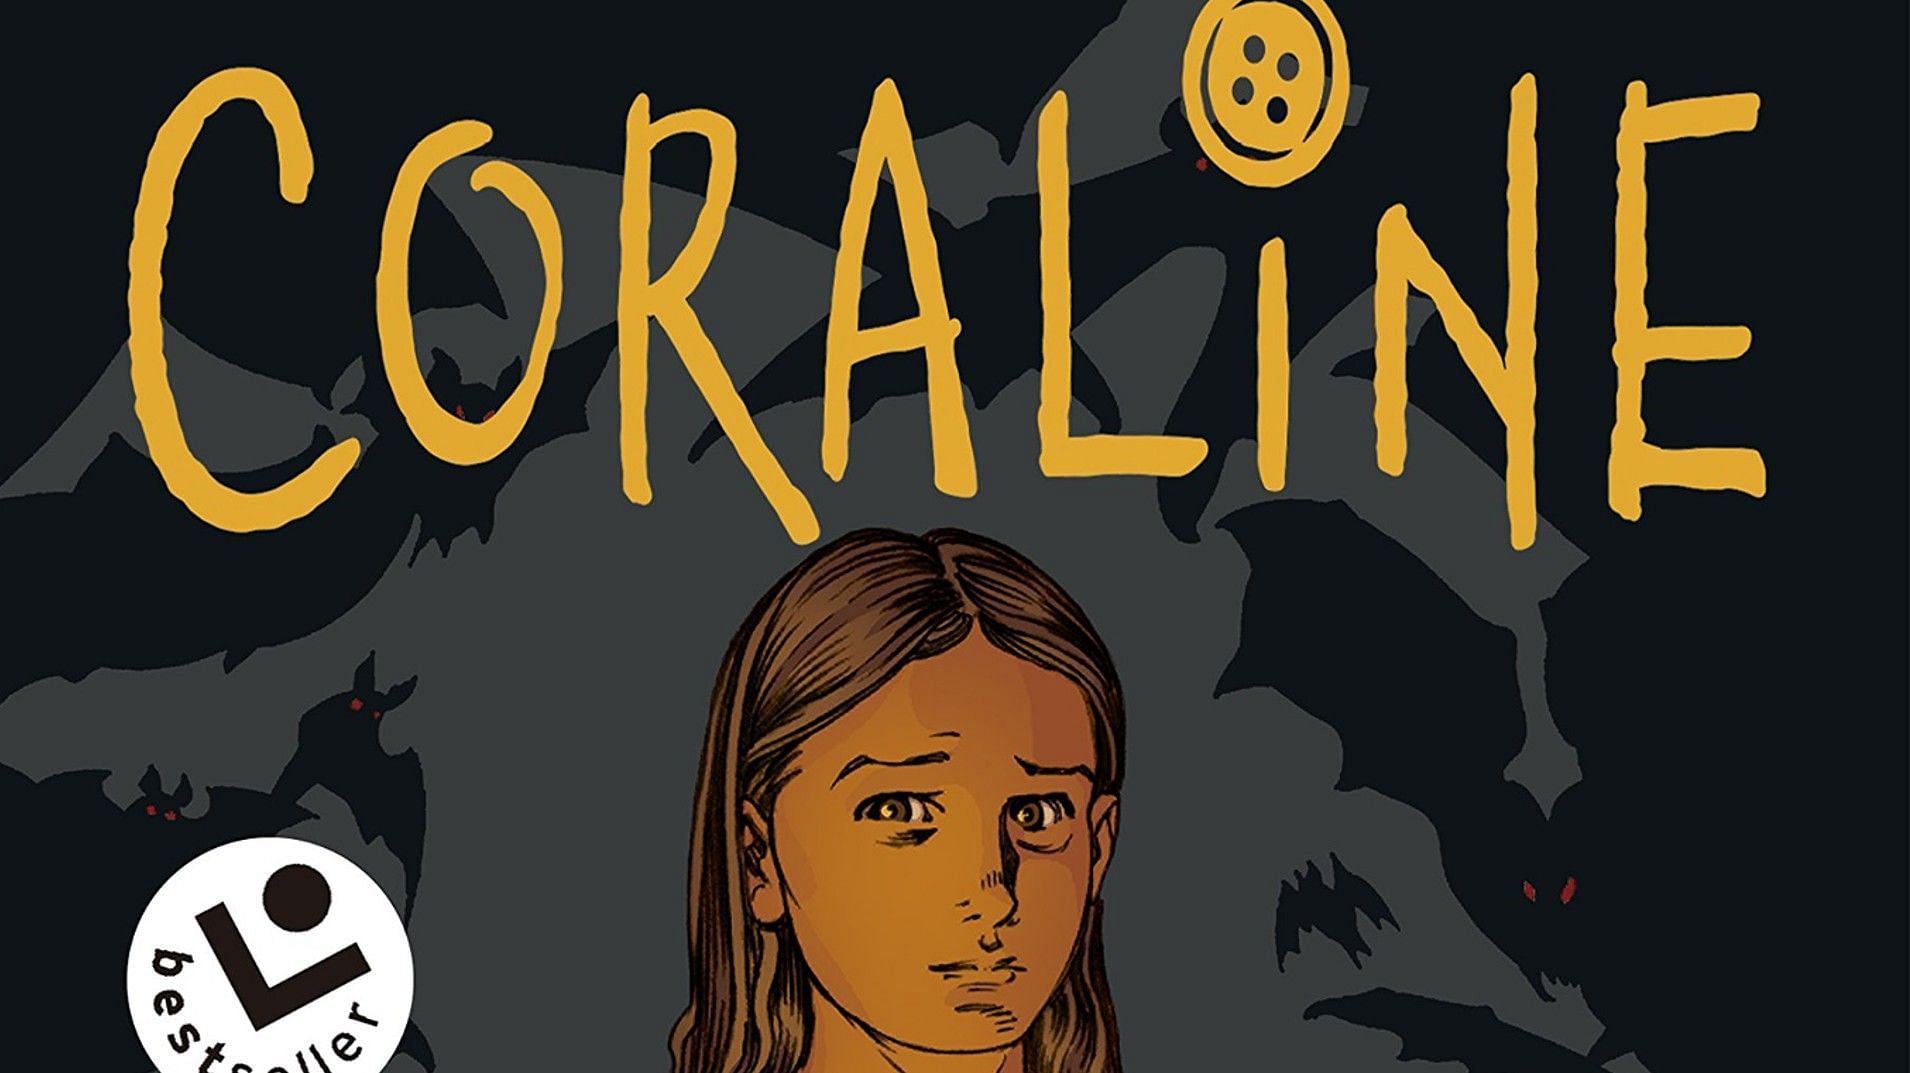 The story follows the titular Coraline as she discovers a world that mirrors her own but isn't everything it seems to be (Image via neilgaiman.com)